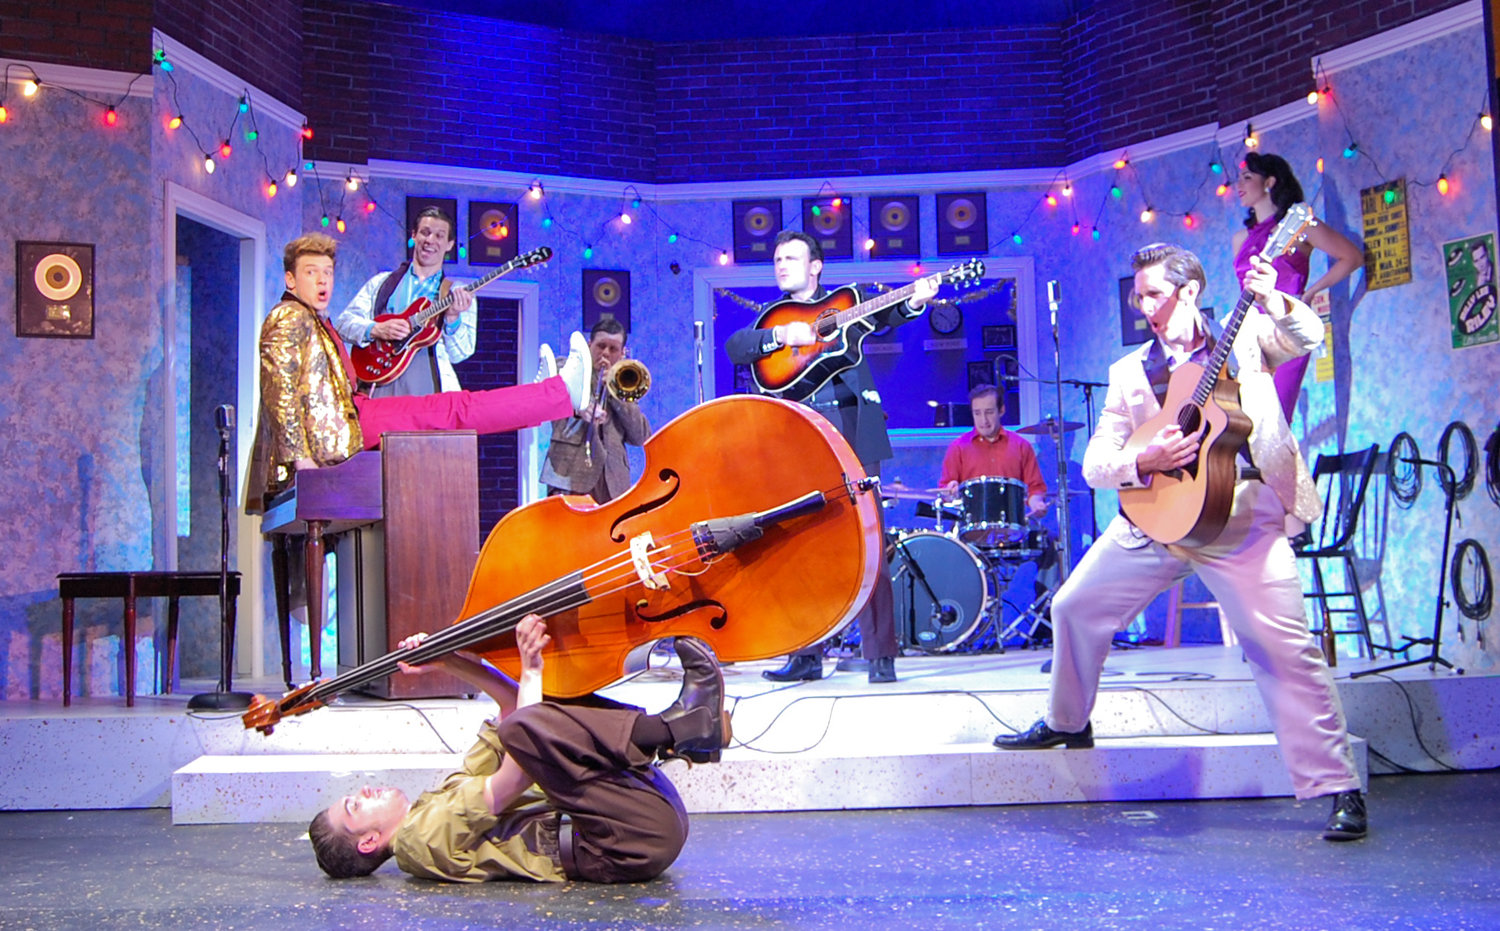 Forestburgh Playhouse audiences can expect more fabulous plays and musicals in the 75th anniversary season like the theatre's 2018 smash hit "Million Dollar Quartet."